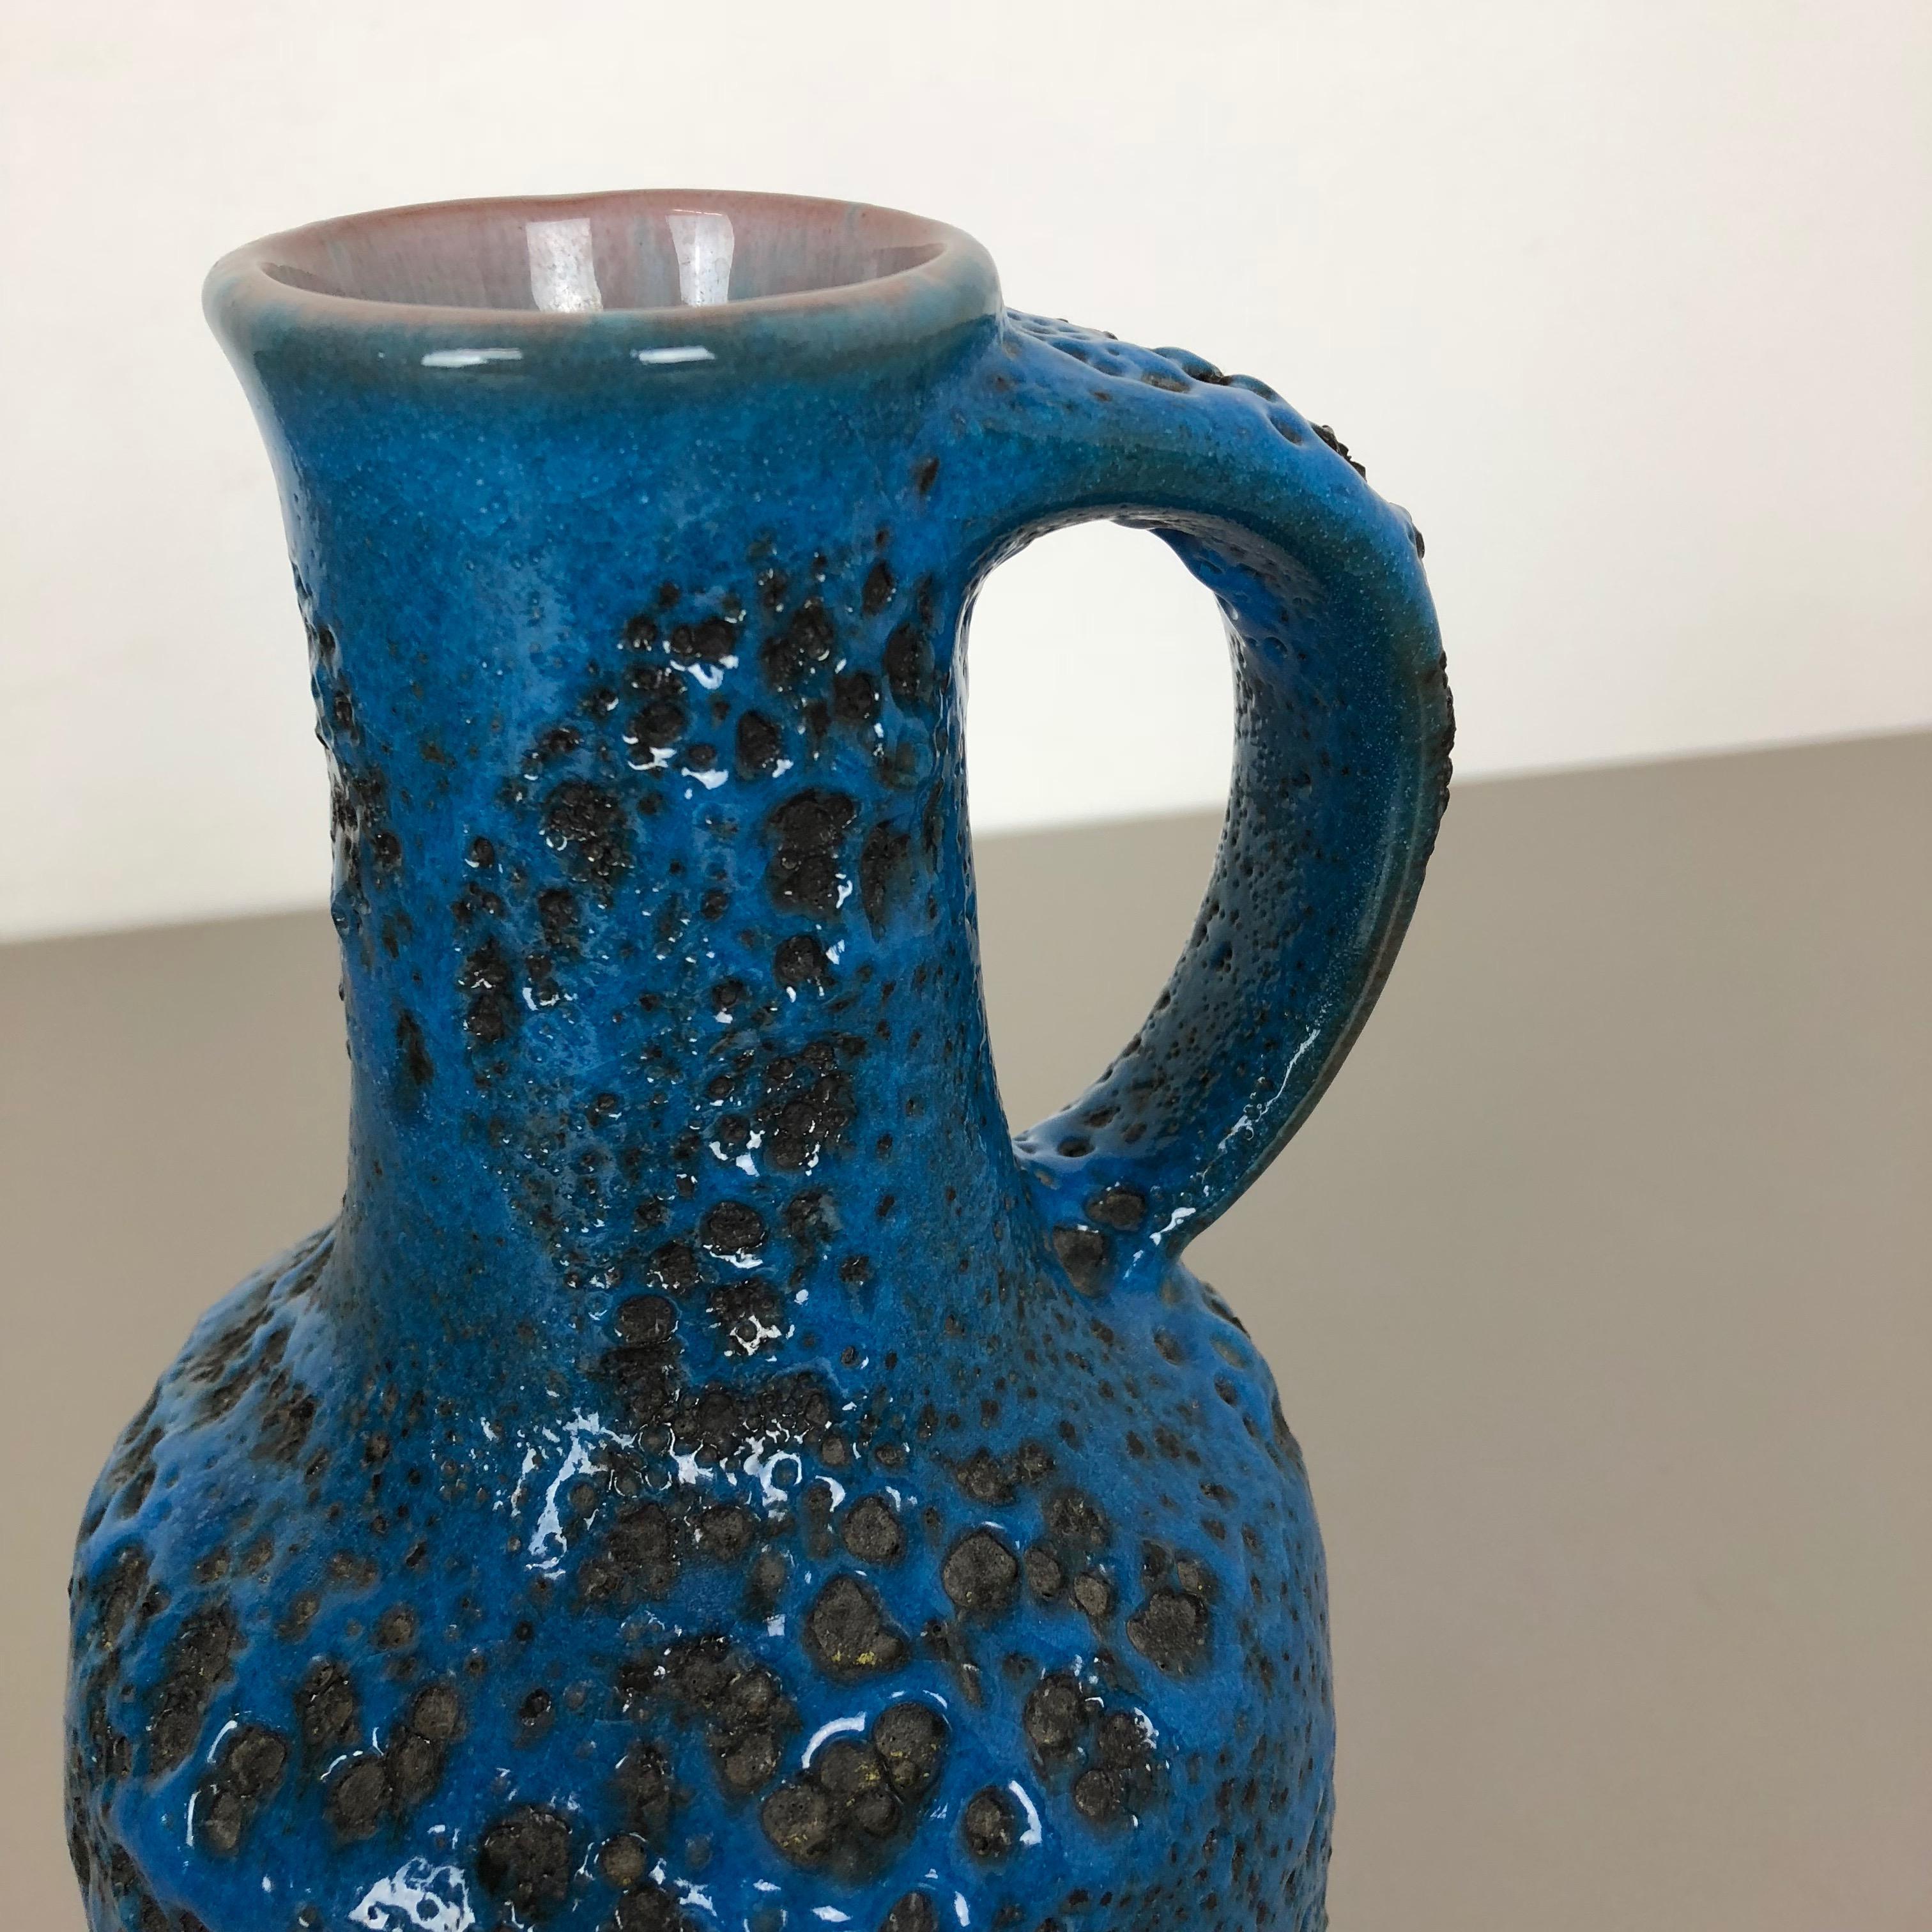 Super Colorful Fat Lava Pottery Vase by Gräflich Ortenburg, Germany, 1950s In Good Condition For Sale In Kirchlengern, DE